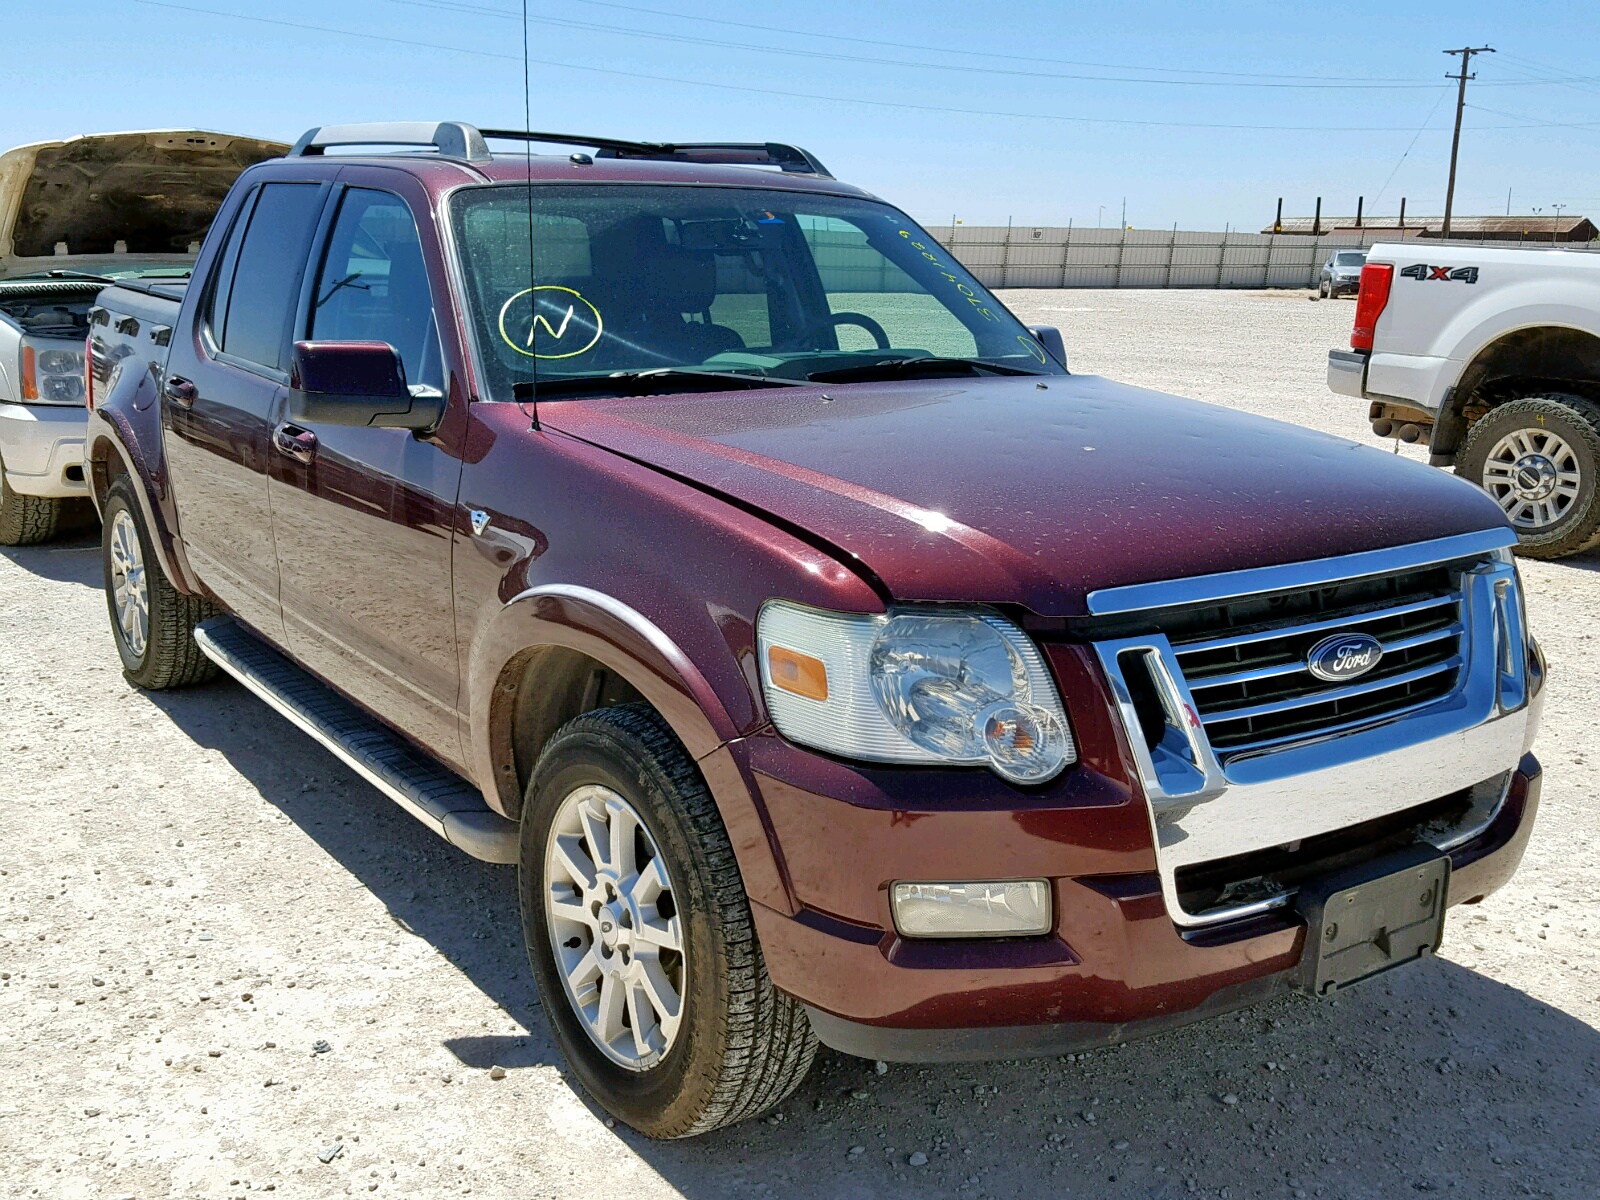 2007 FORD EXPLORER SPORT TRAC LIMITED for Sale | TX - ANDREWS | Wed. Oct 09, 2019 - Used 